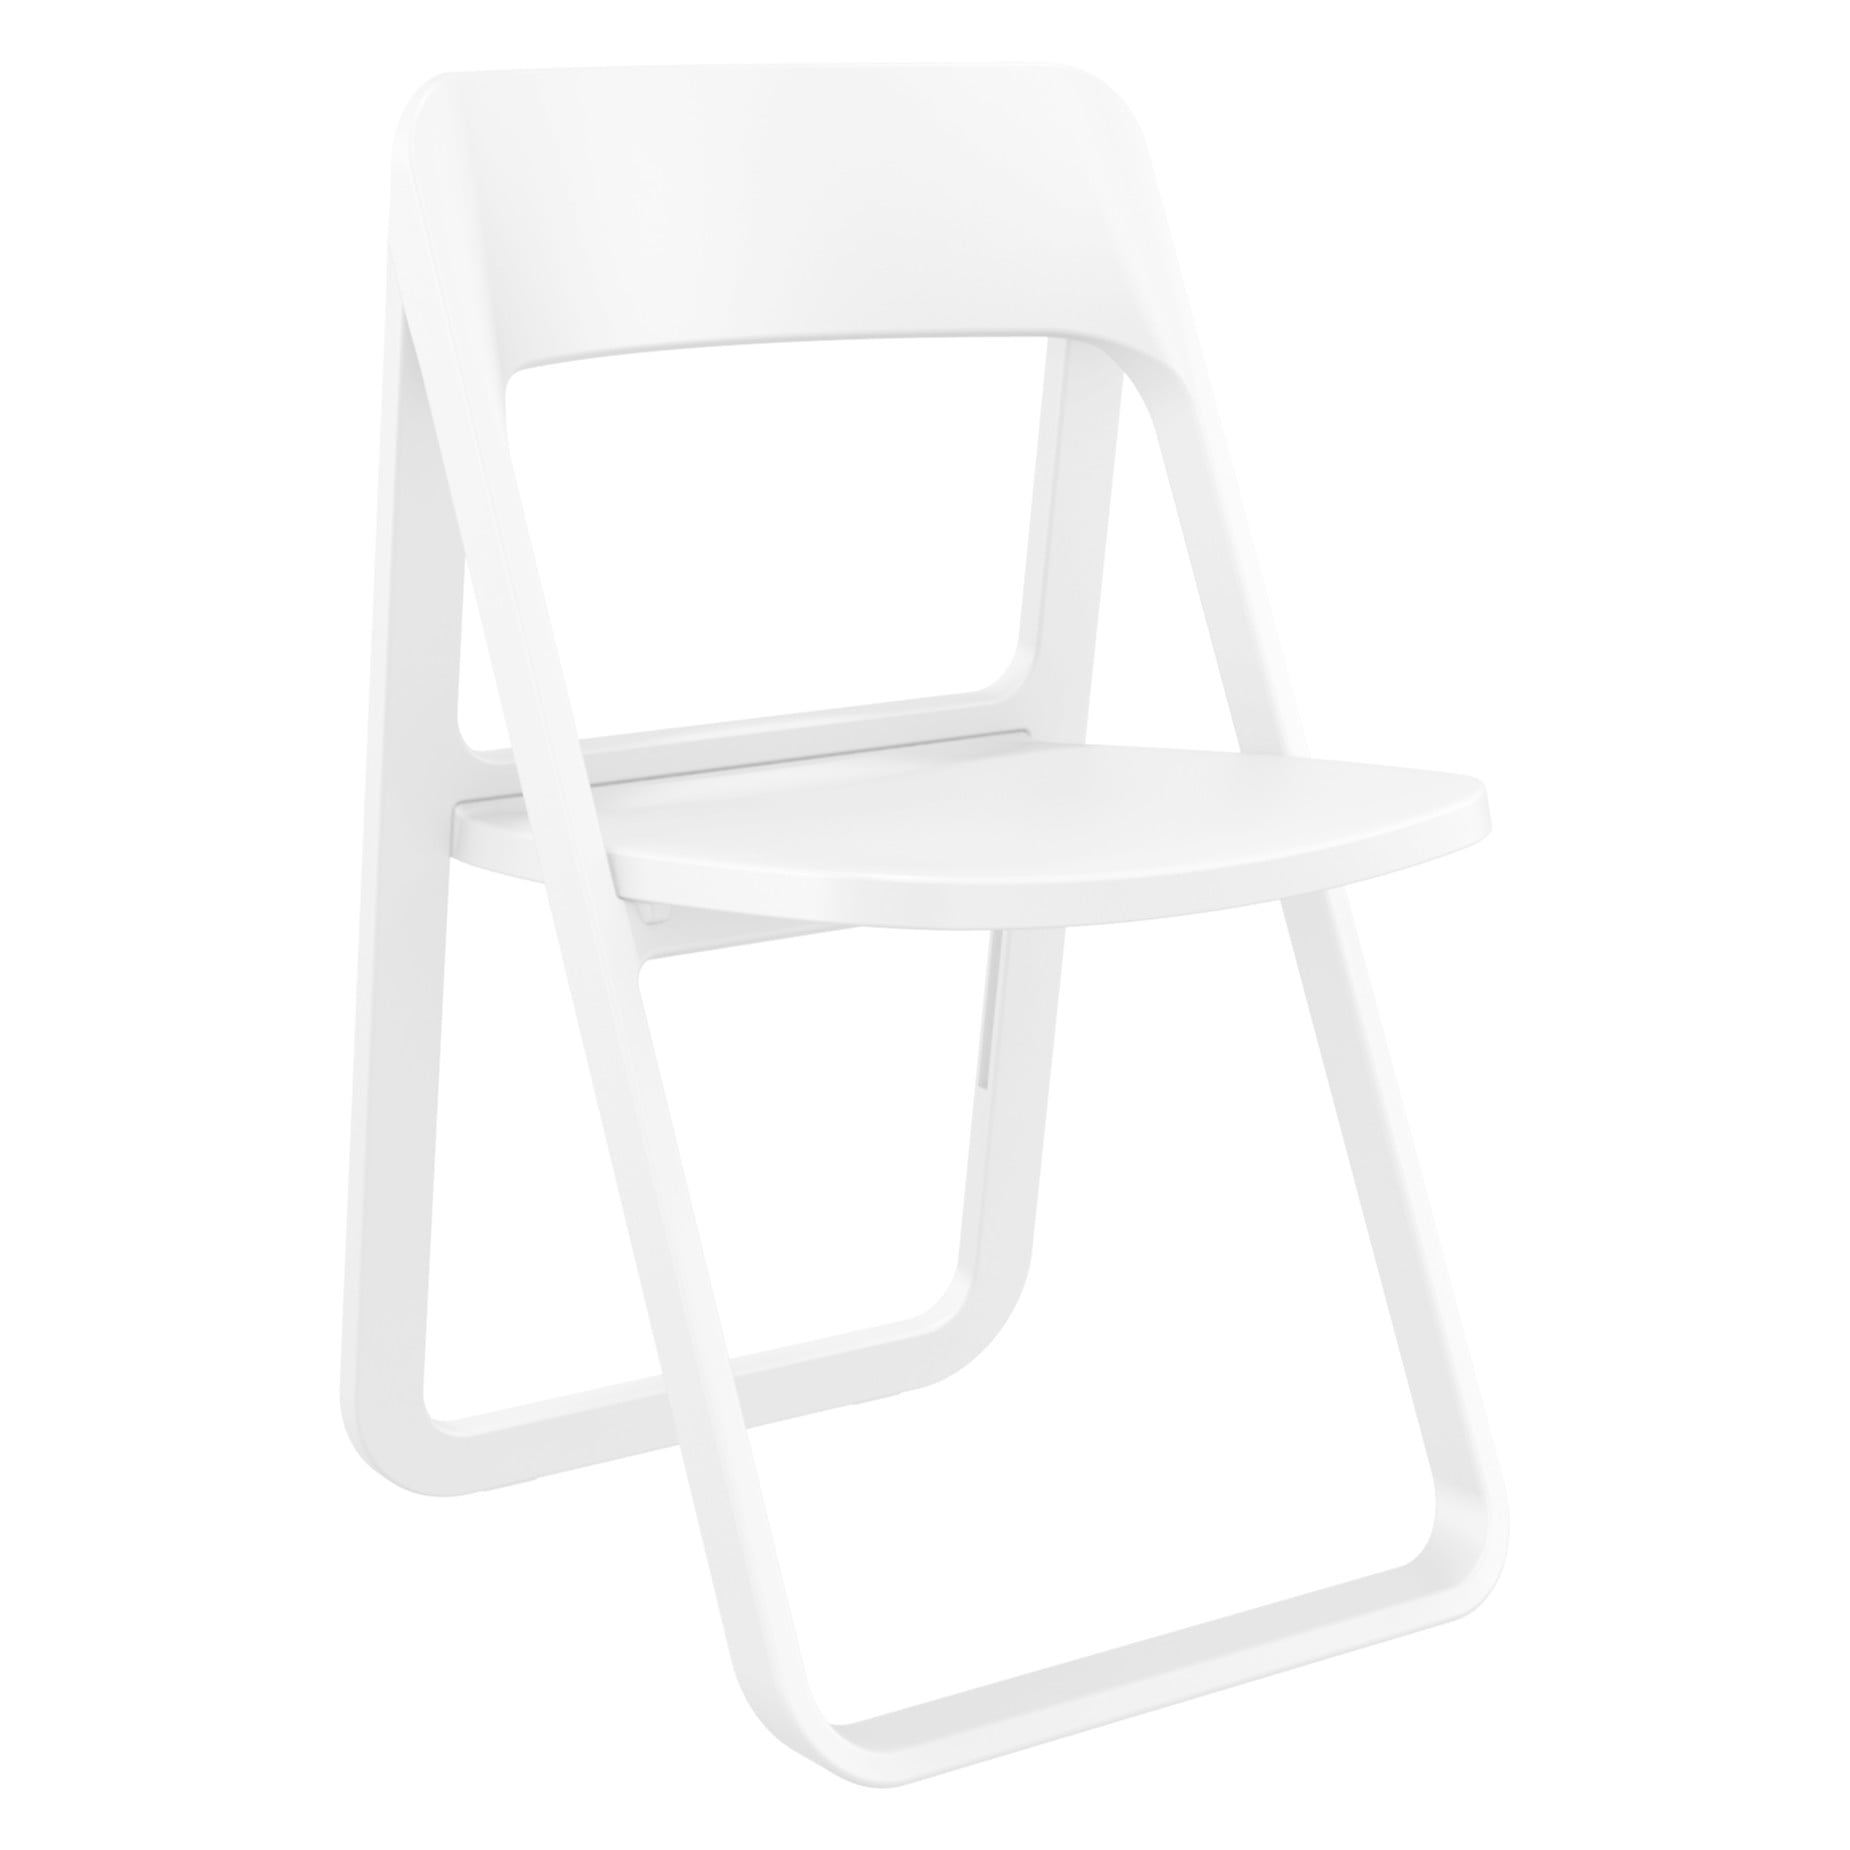 Isp079-whi Dream Folding Outdoor Chair, White